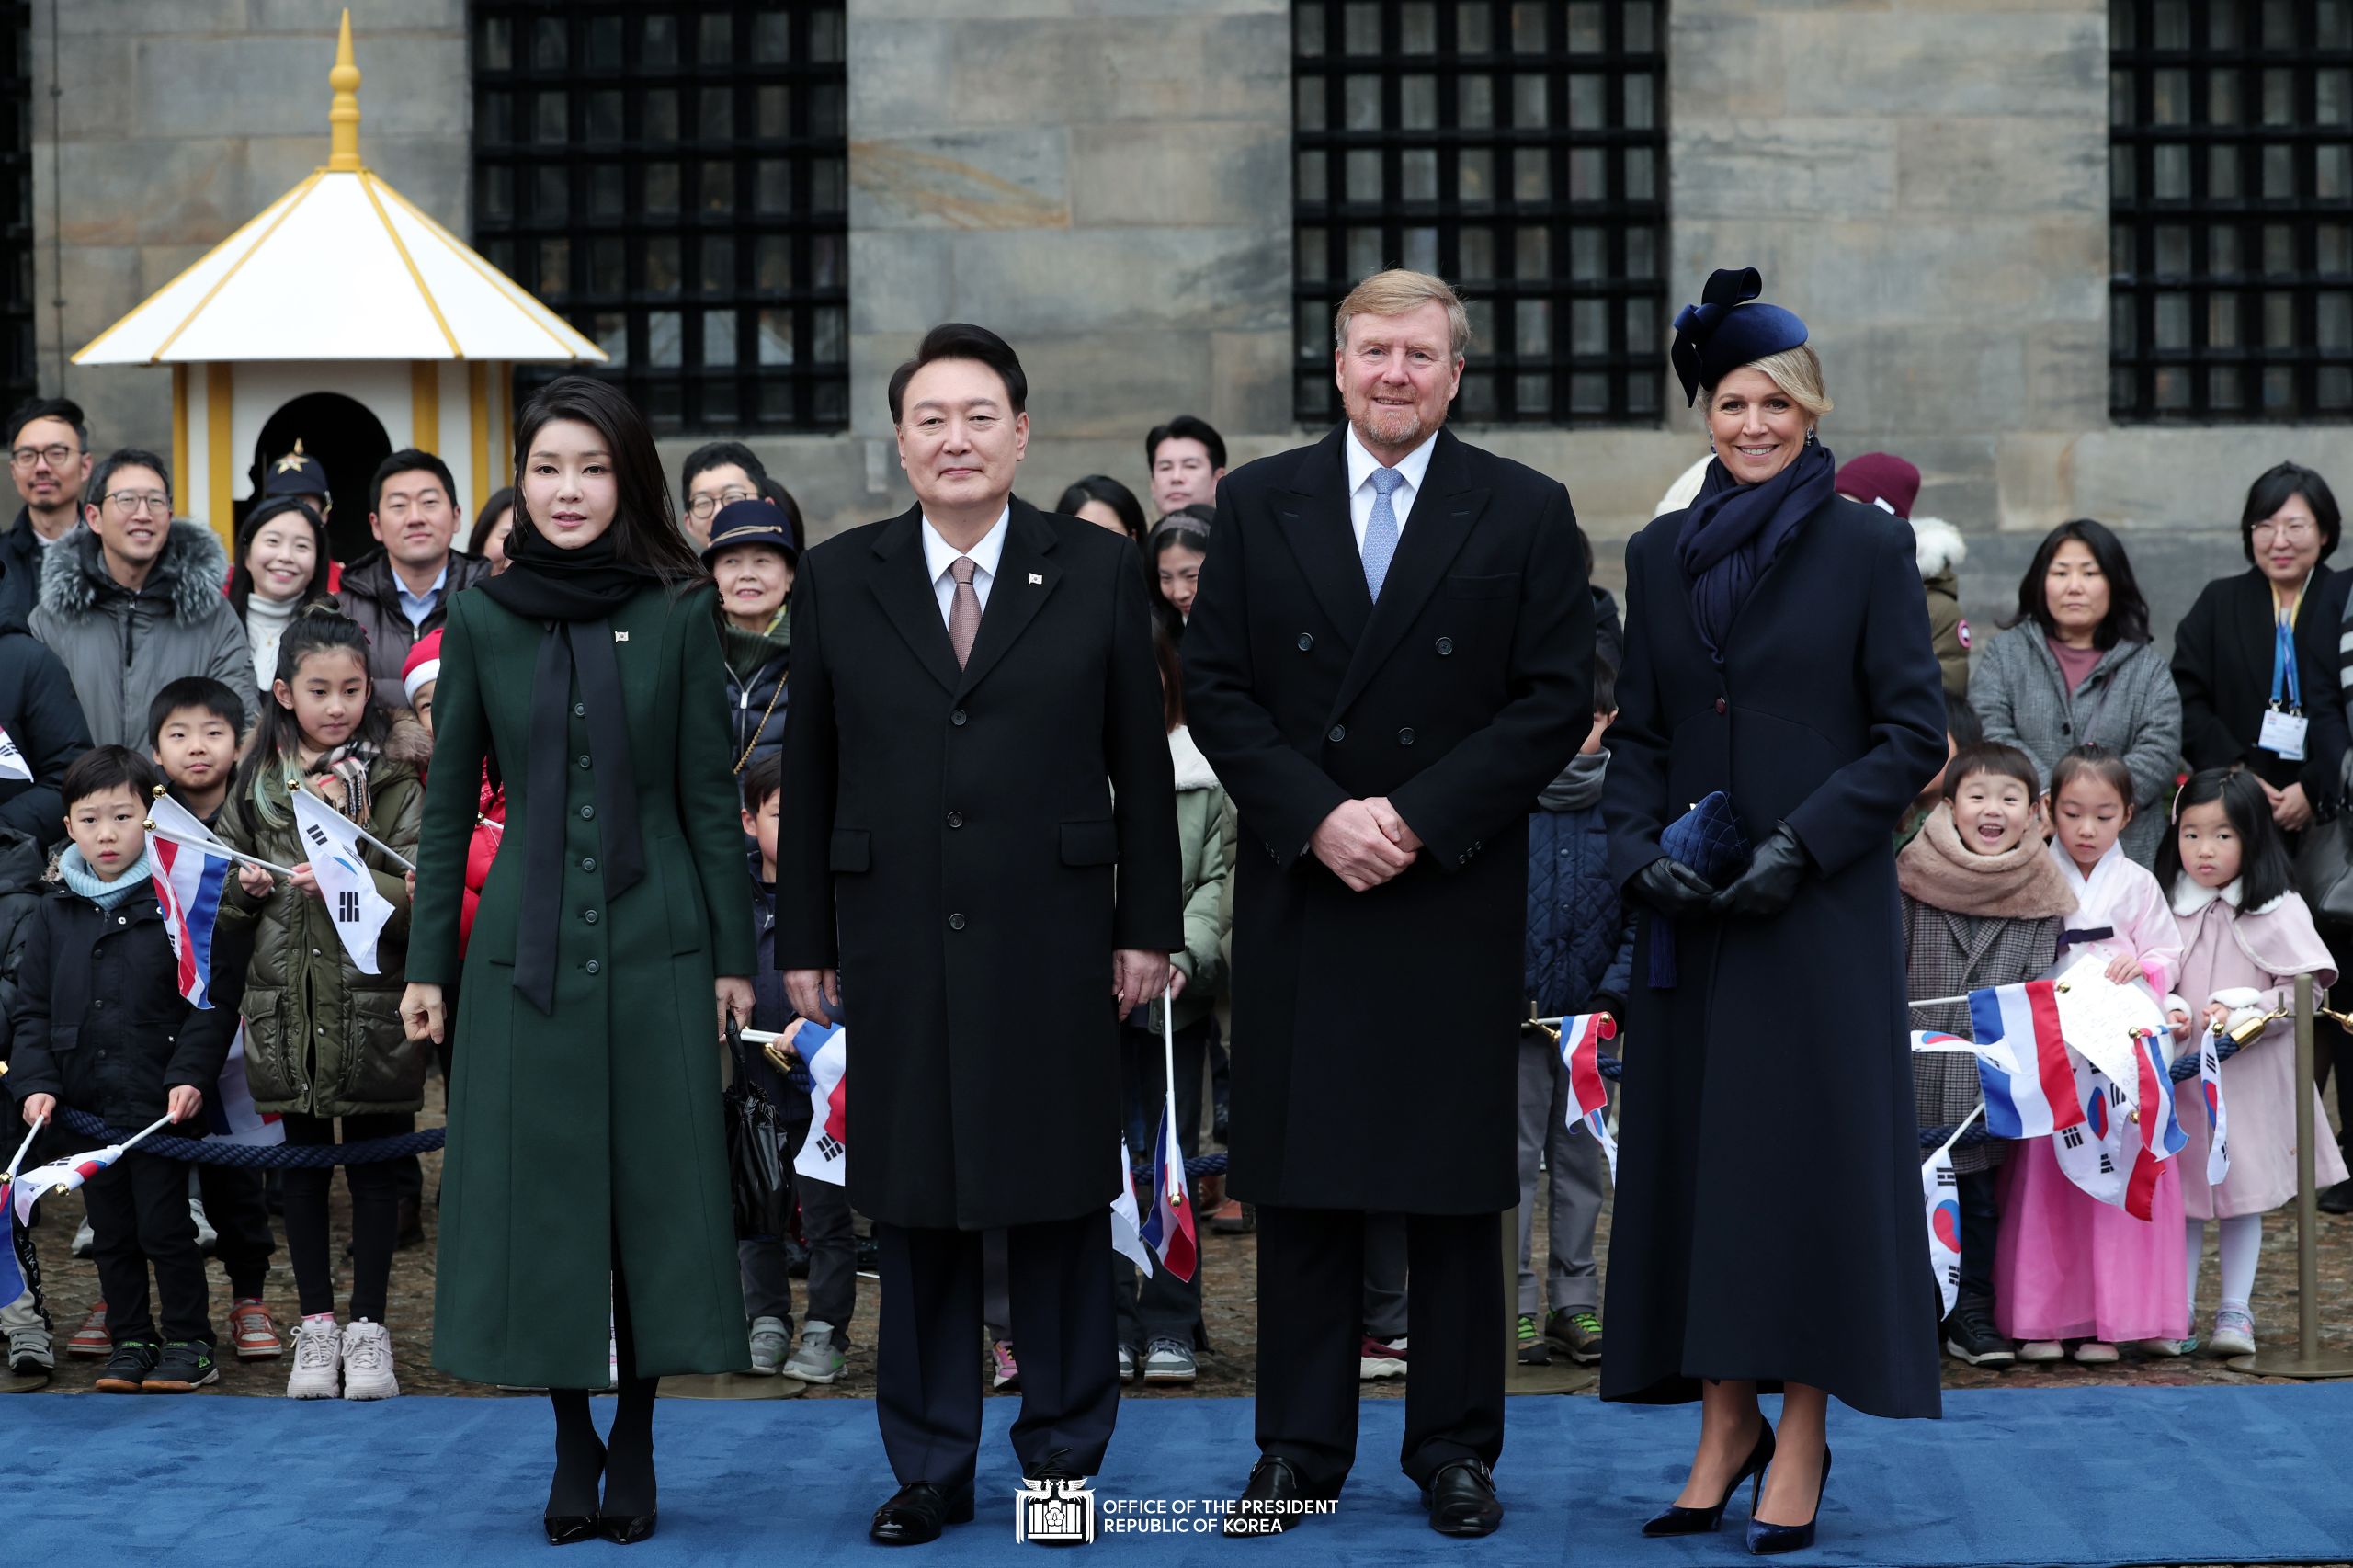 Official welcoming ceremony for the State Visit to the Netherlands